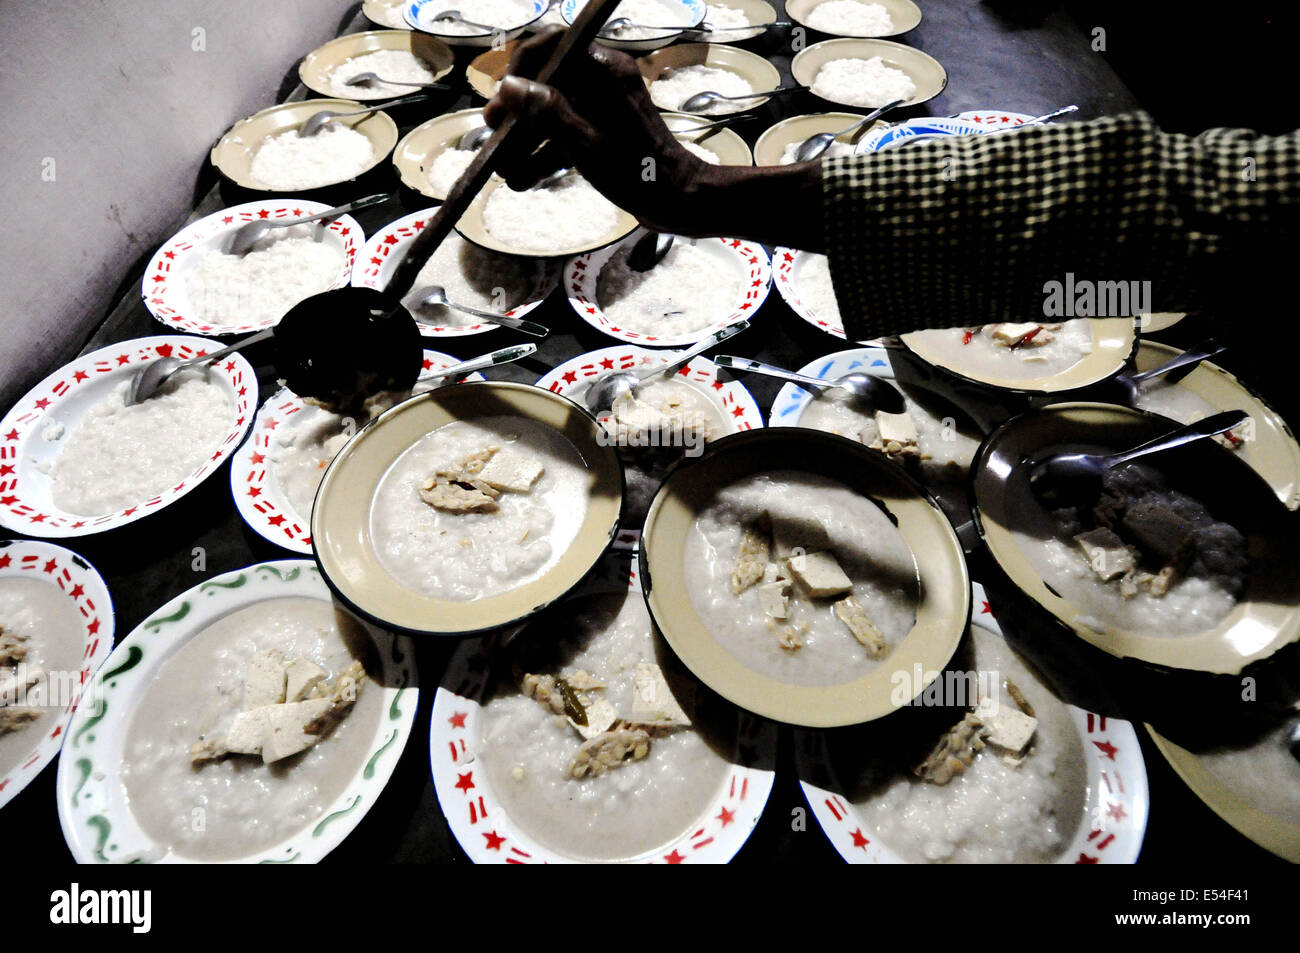 Yogyakarta, Indonesia. 20th July, 2014. Porridge for Iftar are seen at Sabiilurrosyaad Mosque in Yogyakarta, Indonesia, July 20, 2014. Muslims here eat porridge for Iftar during Ramadan month as tradition. Credit:  Oka Hamied/Xinhua/Alamy Live News Stock Photo